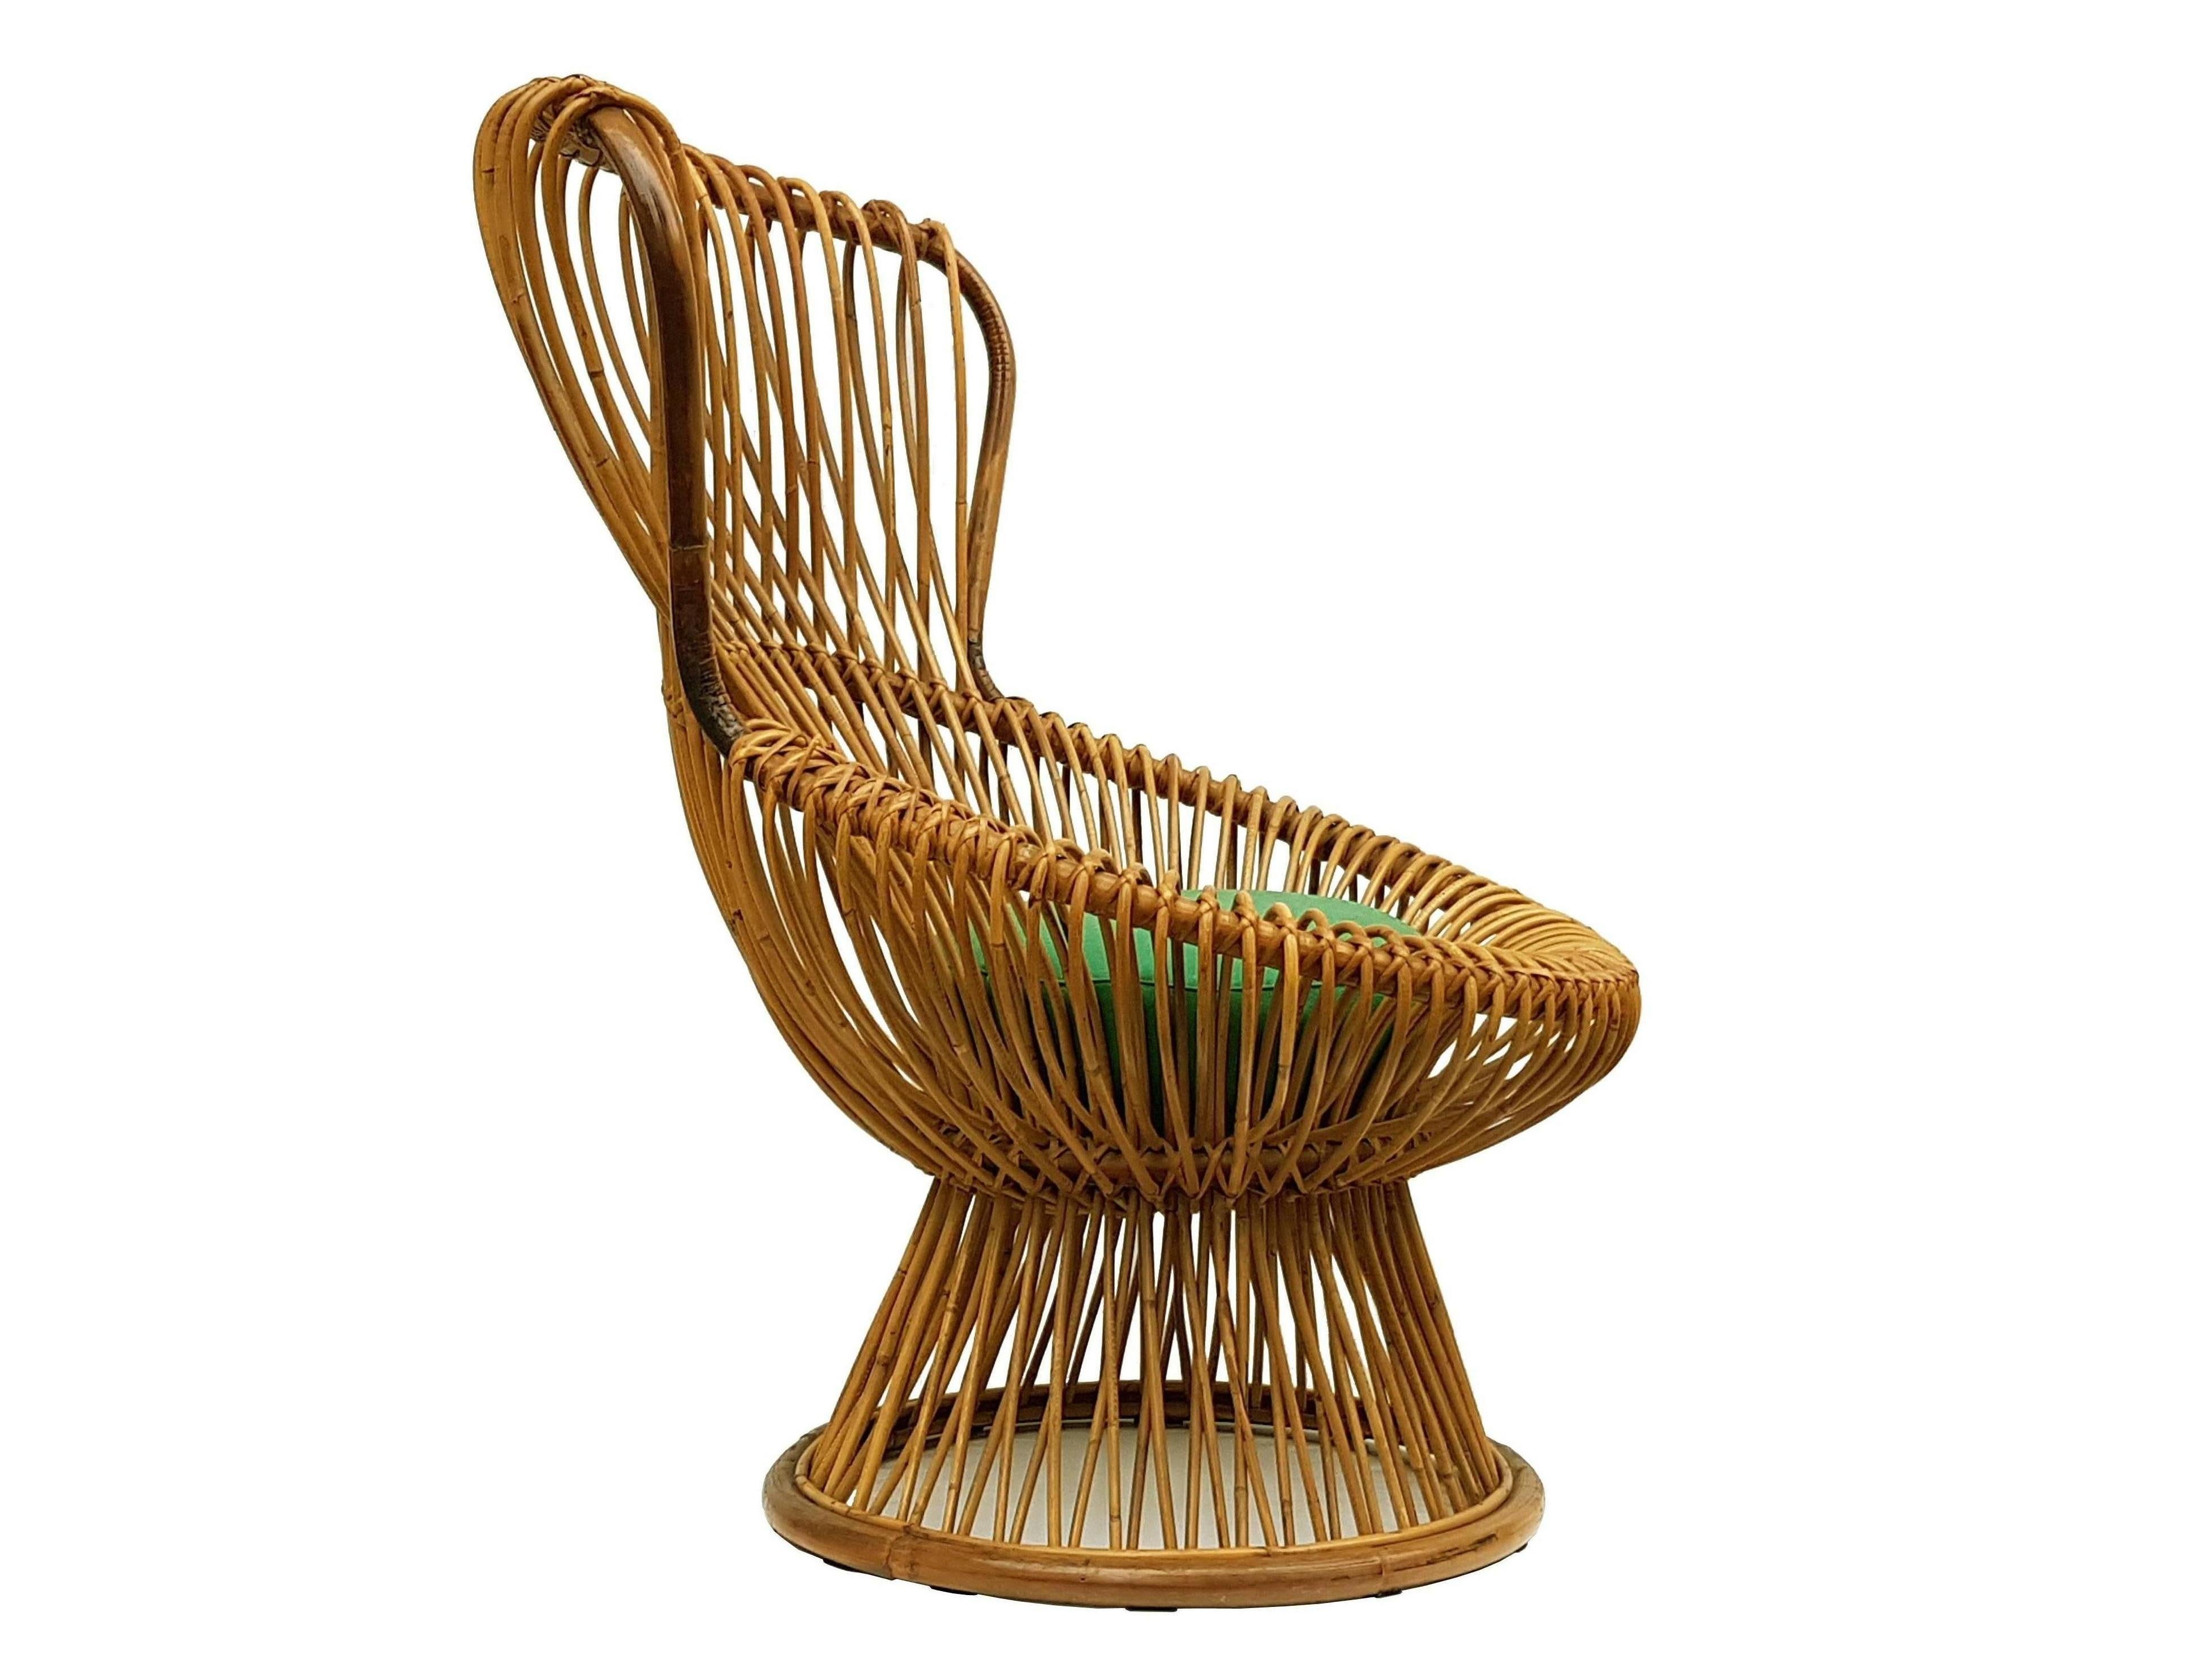 This wicker armchair, 